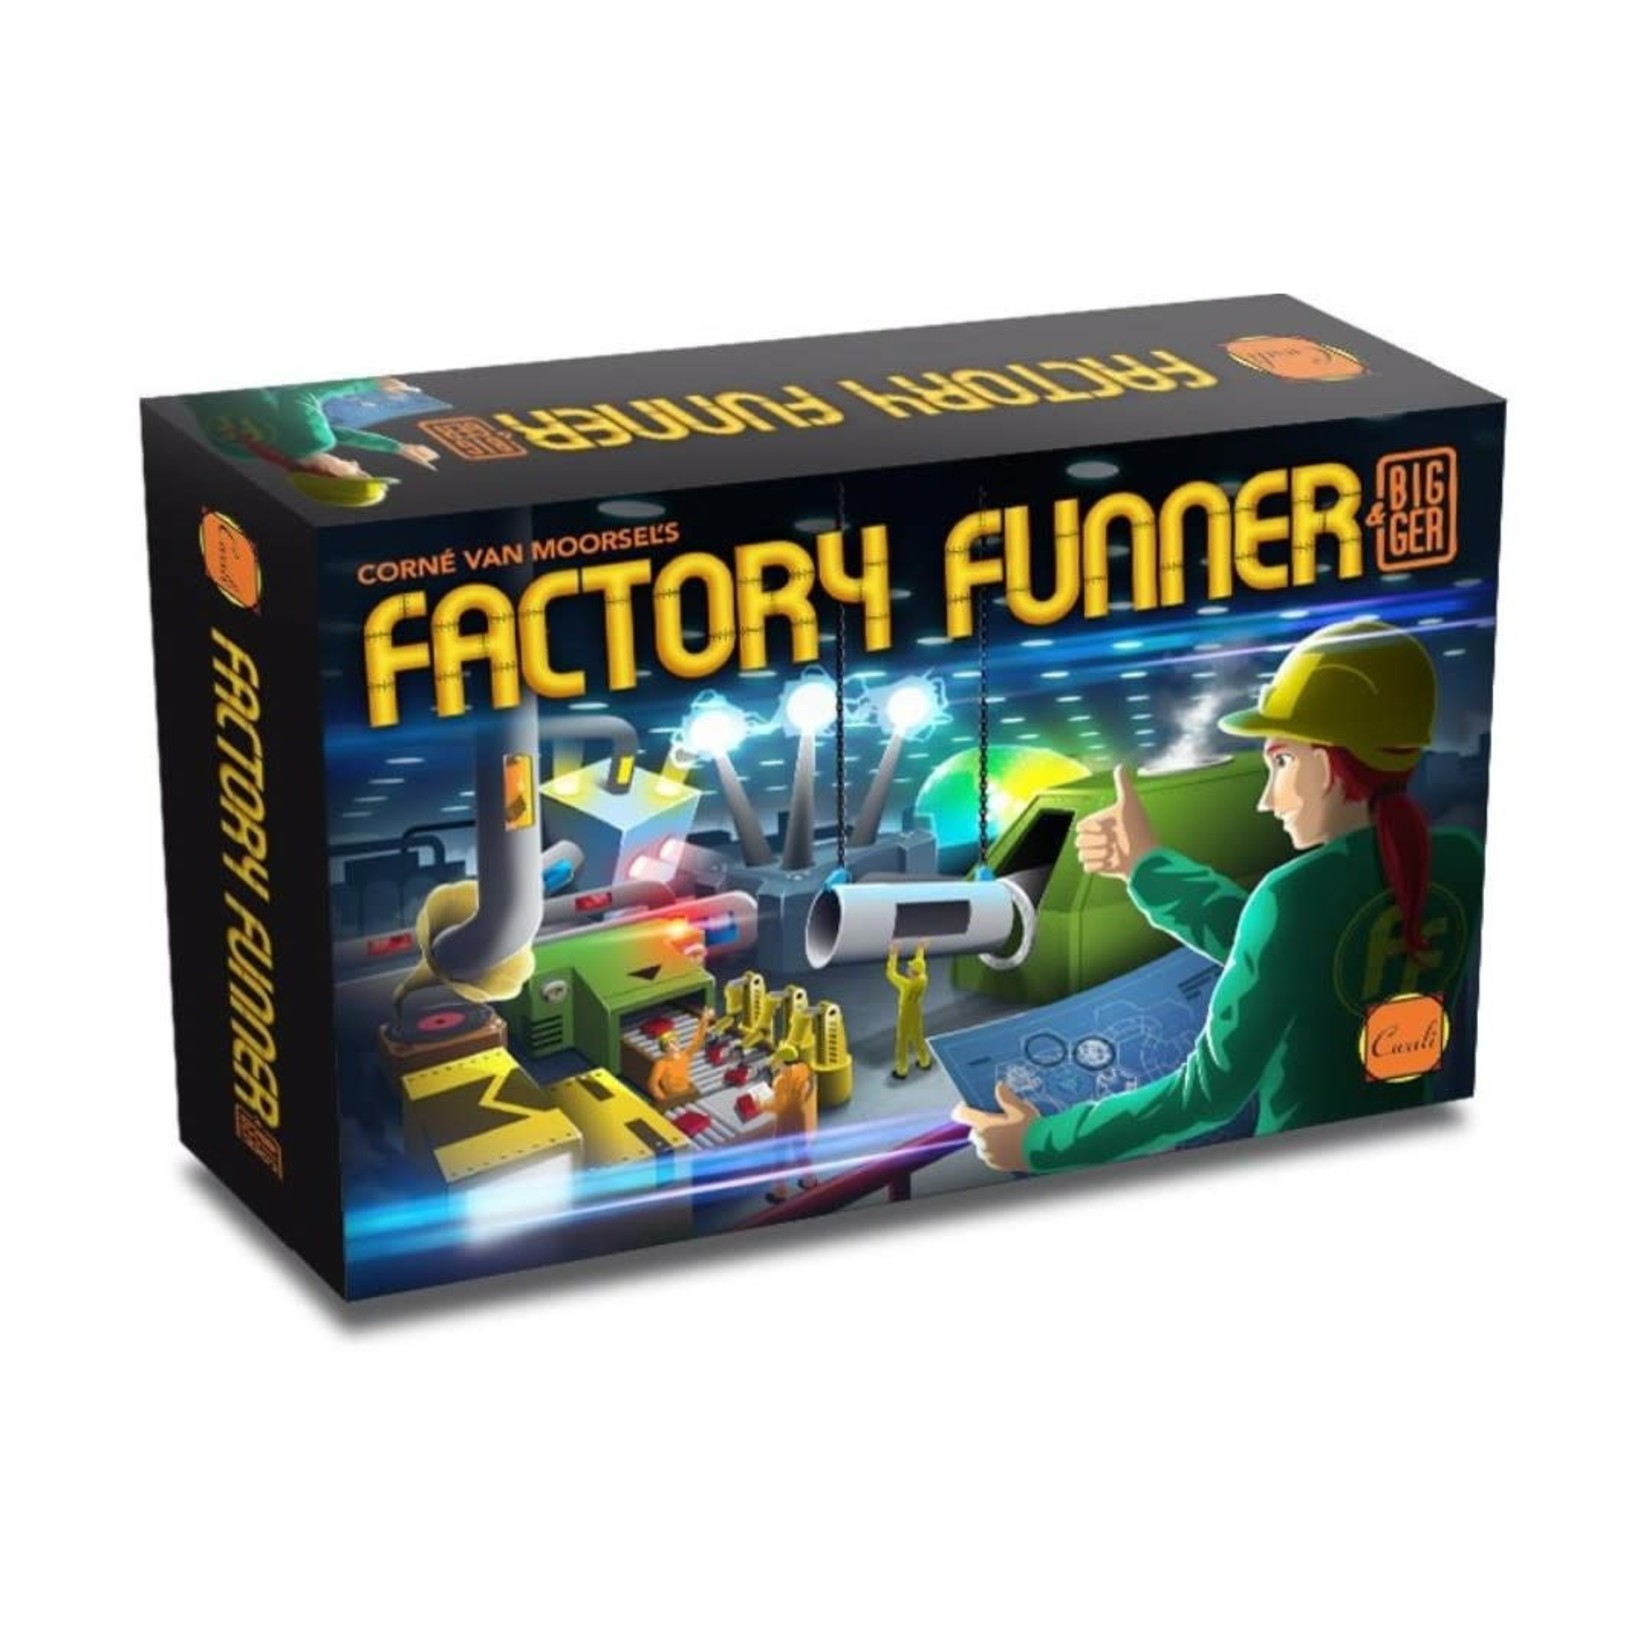 Let's All Play Factory Funner